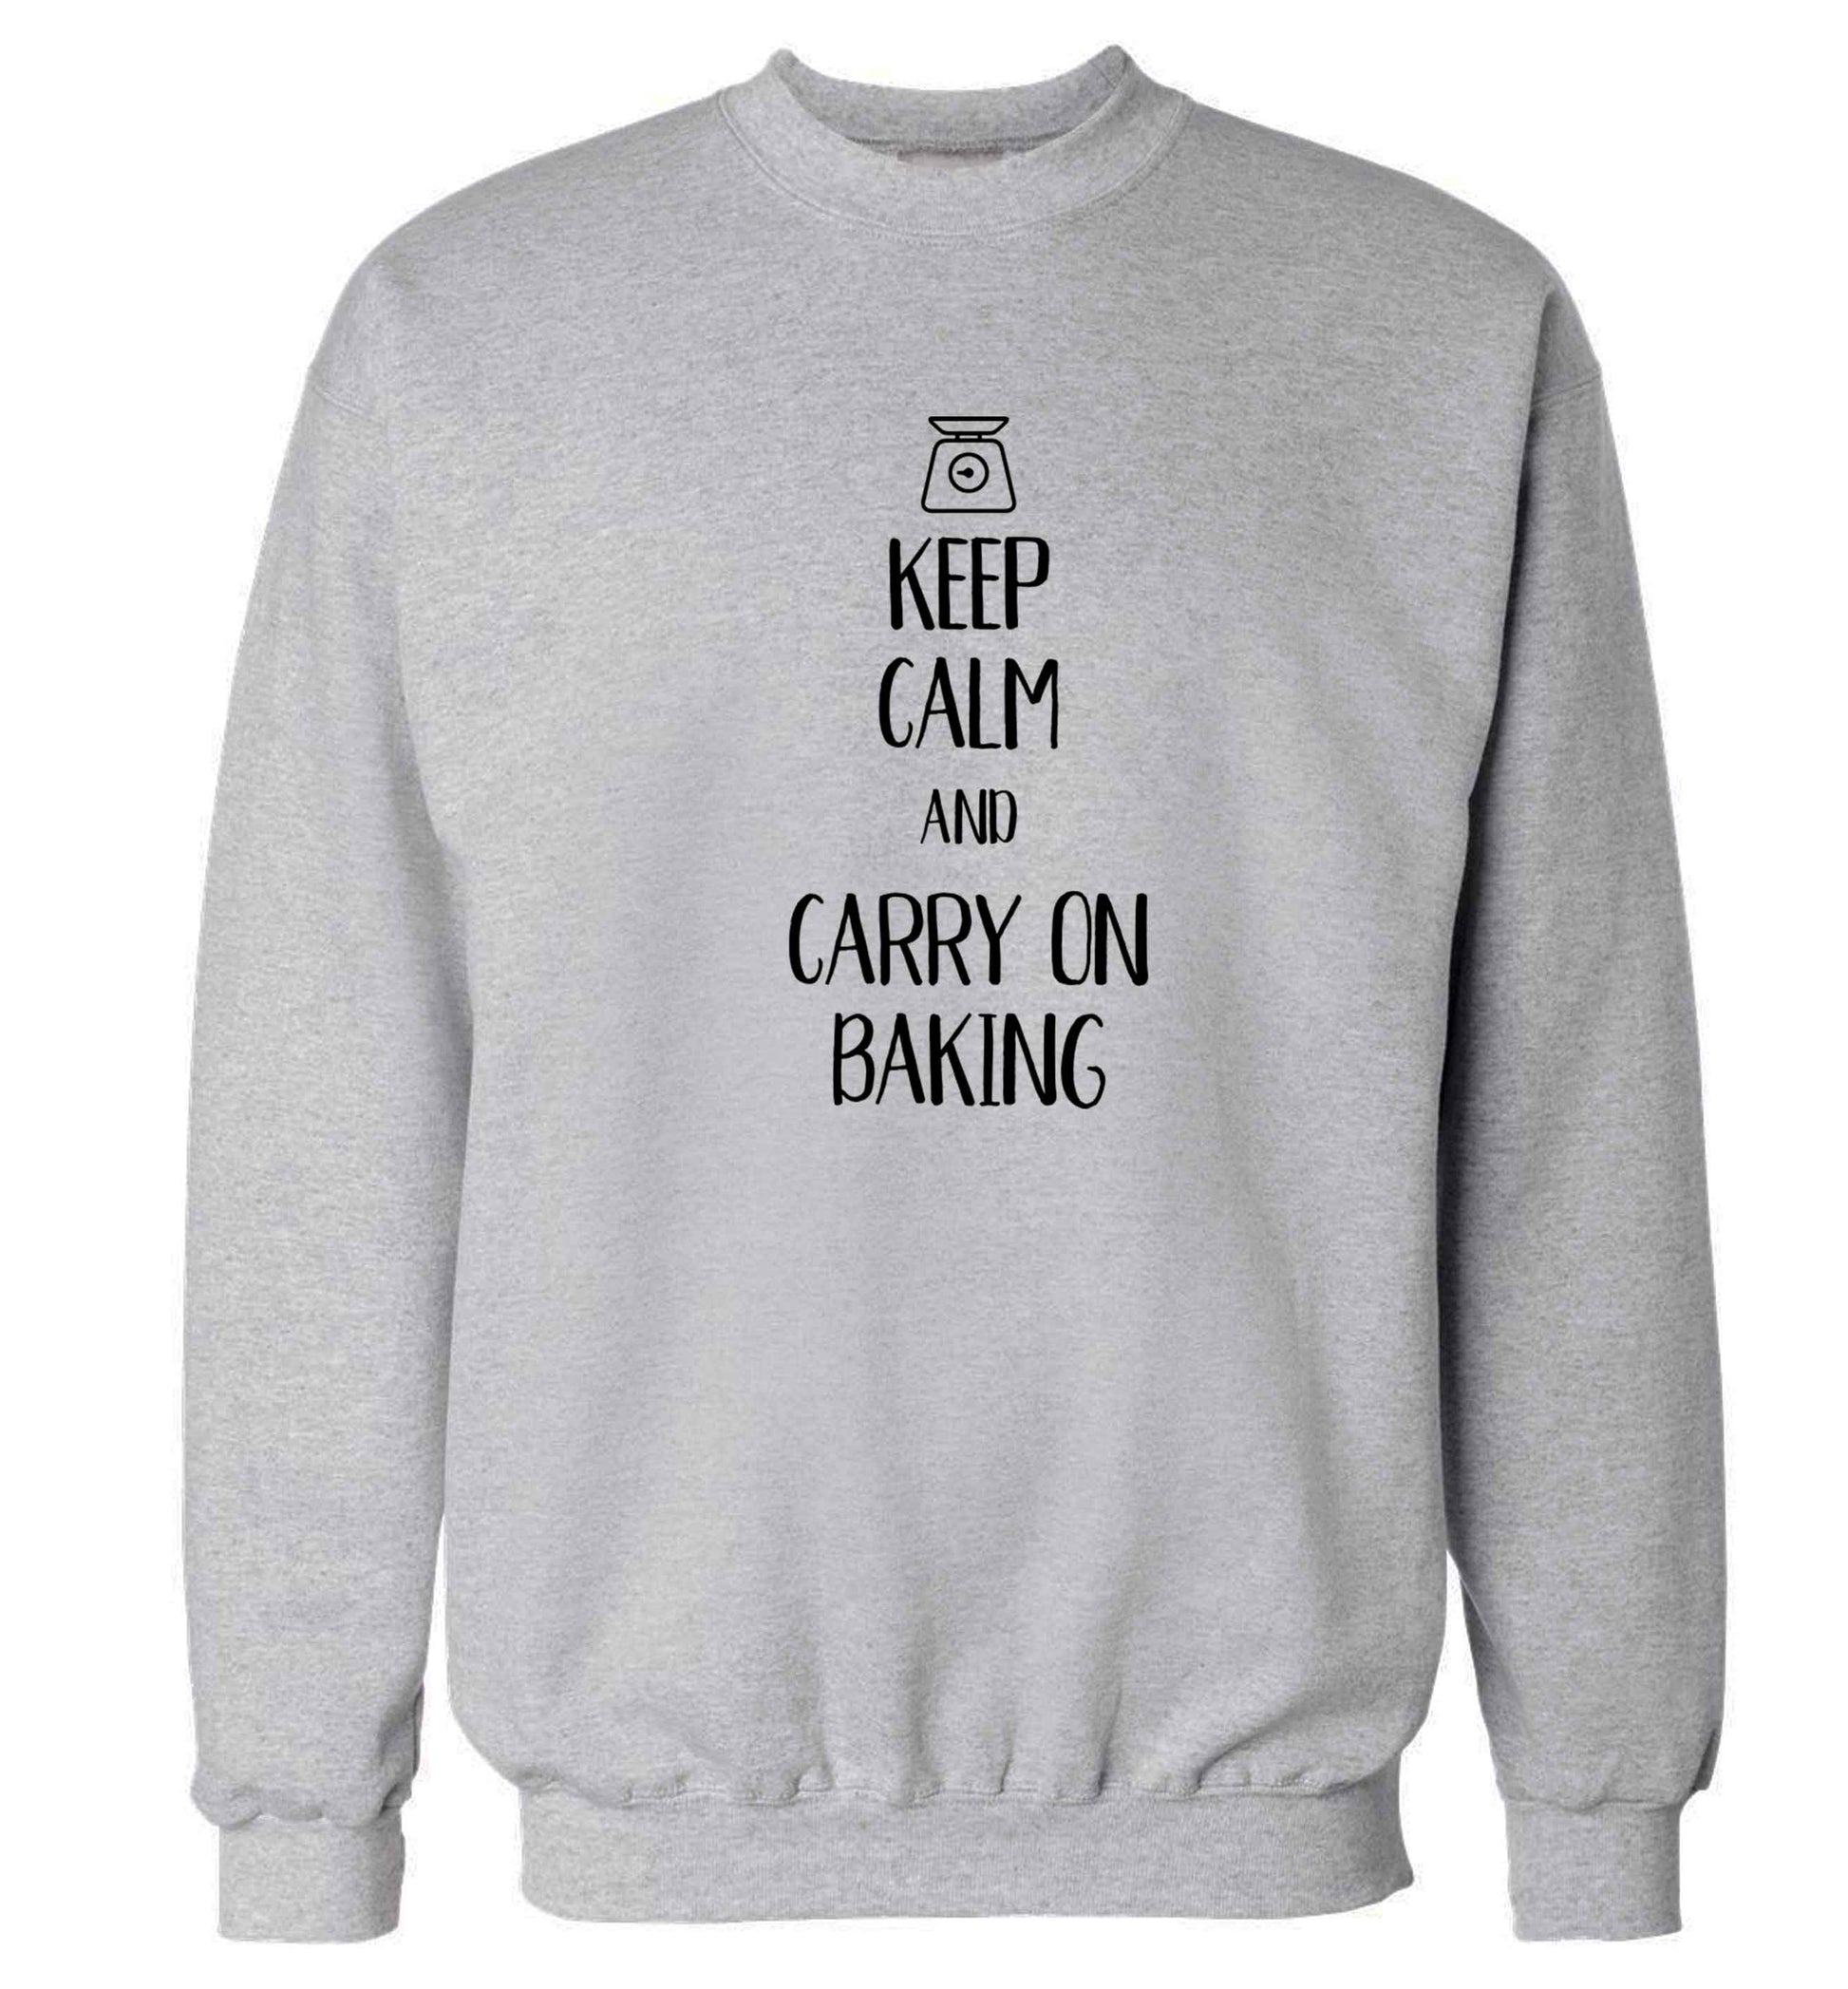 Keep calm and carry on baking Adult's unisex grey Sweater 2XL